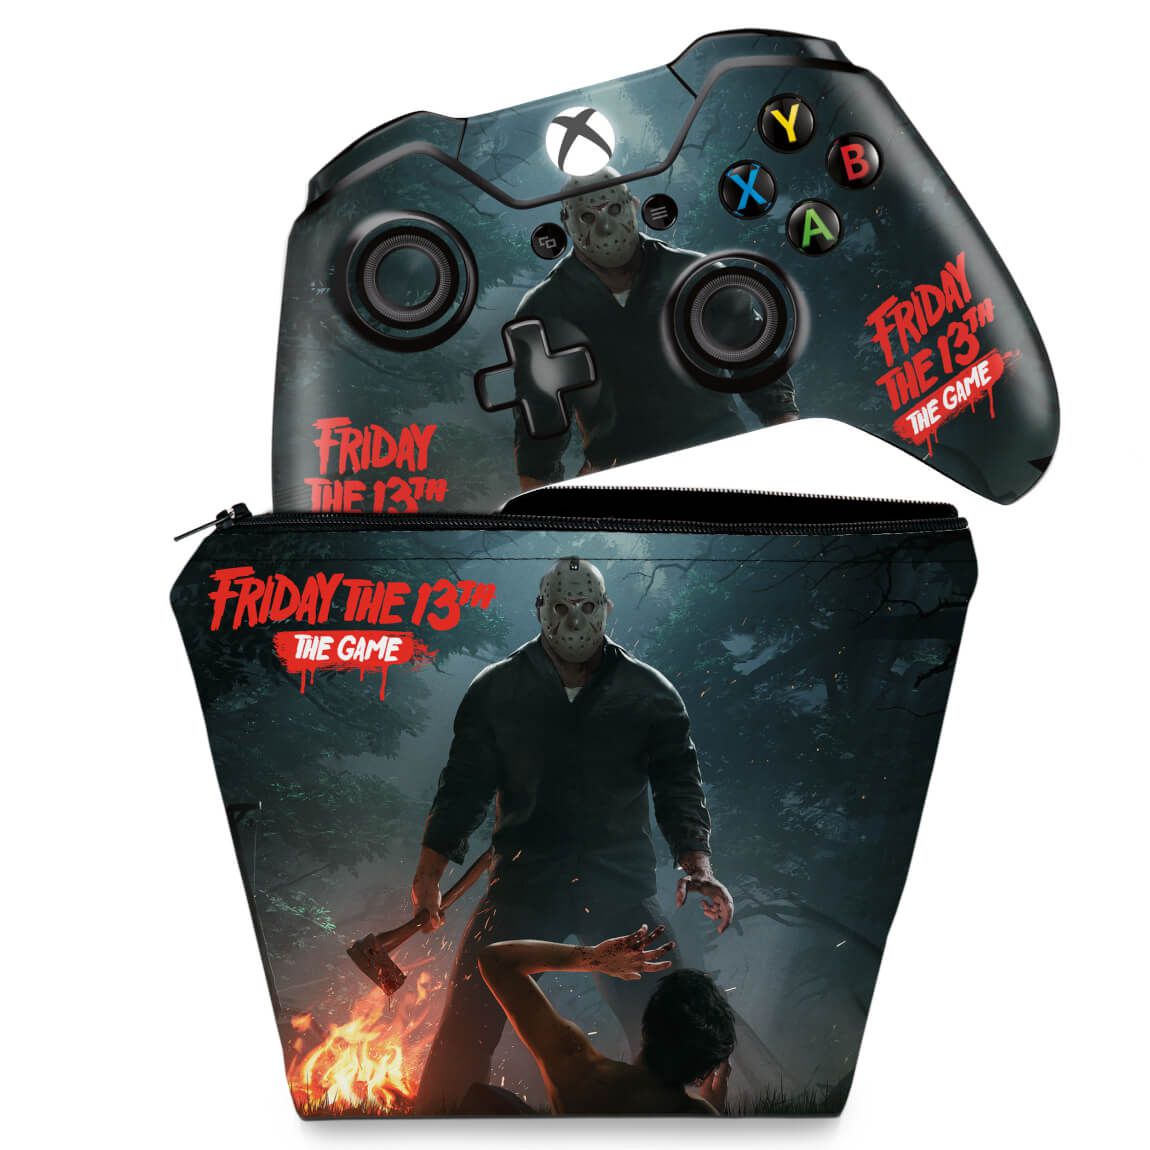 KIT Capa Case e Skin Xbox One Fat Controle - Friday the 13th The game - Pop  Arte Skins